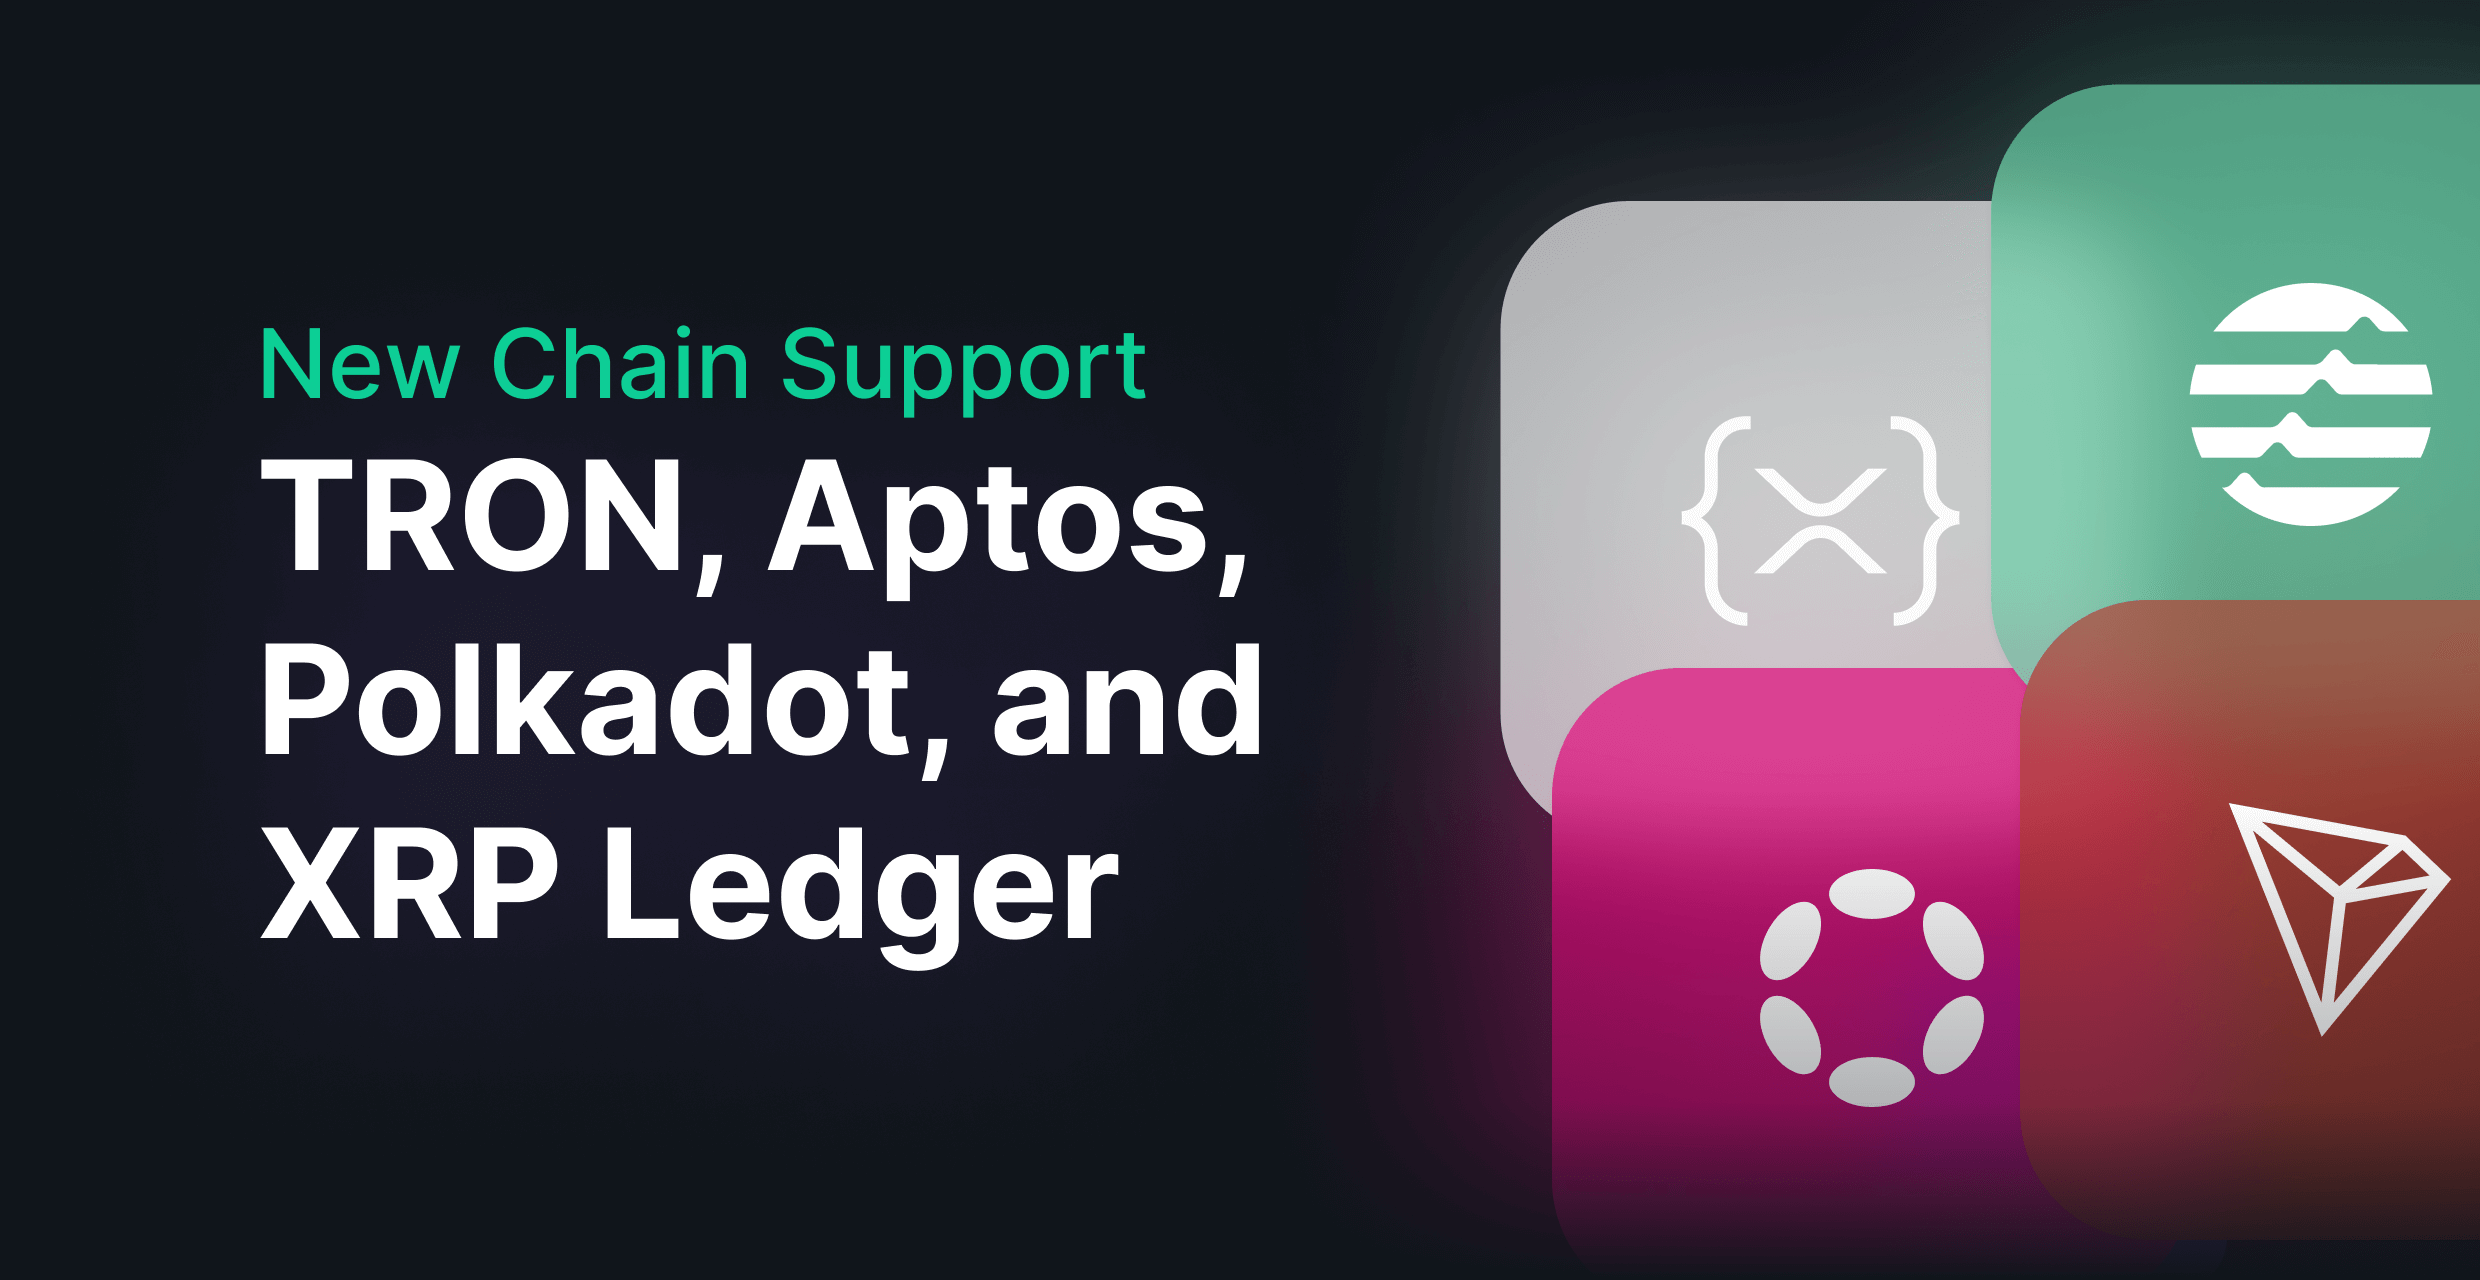 New Chain Support: TRON, Aptos, Polkadot, and XRP Ledger